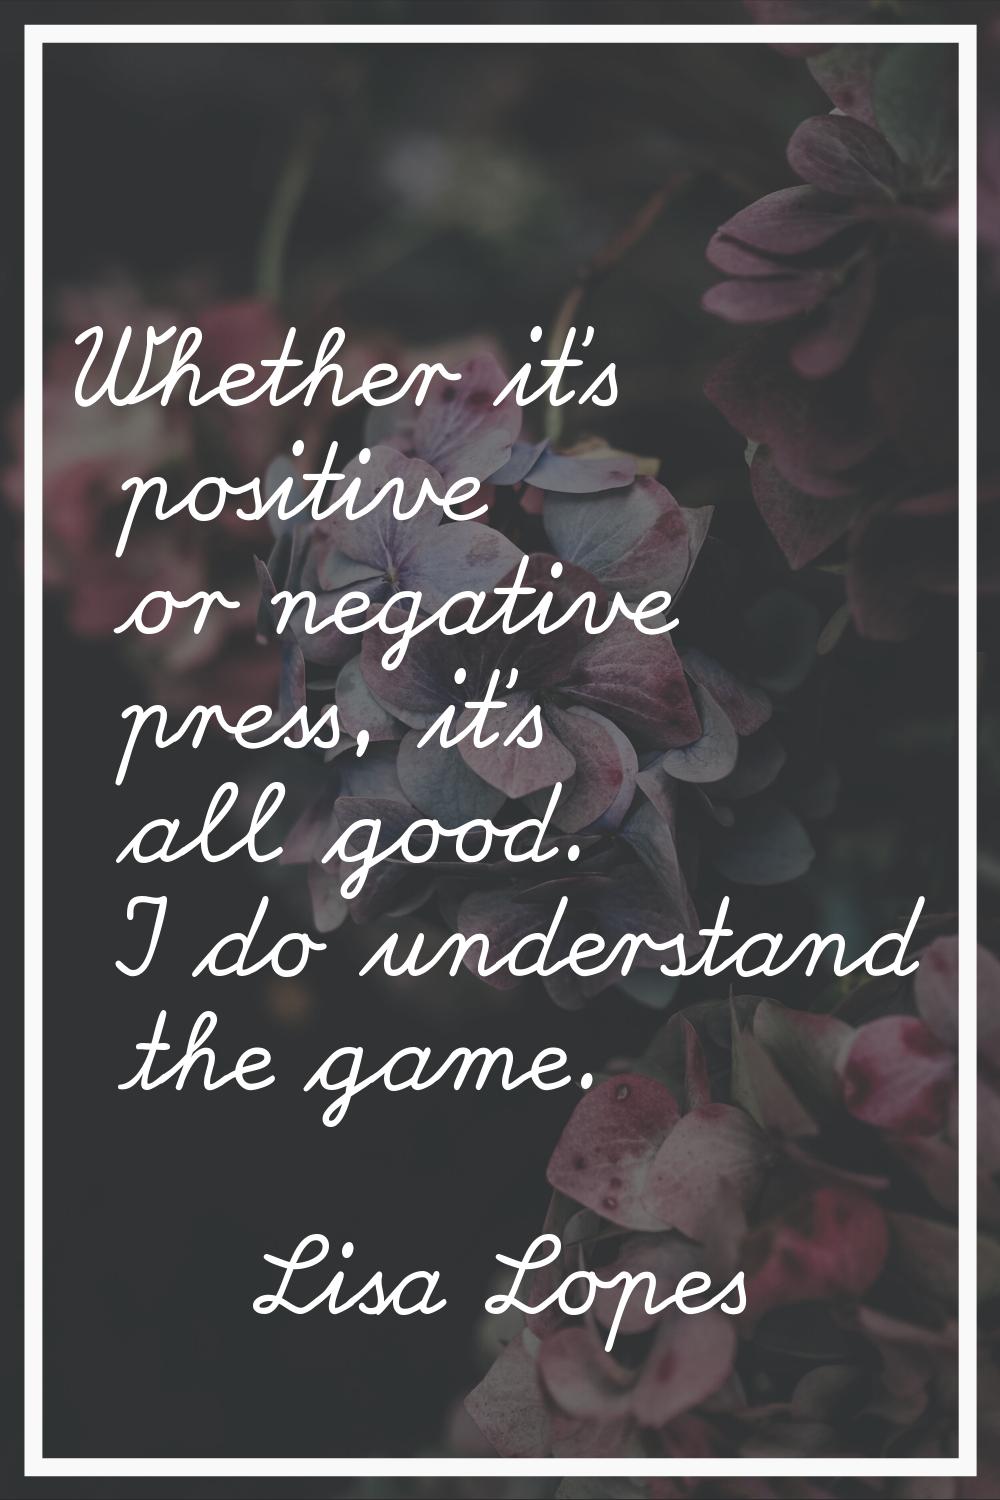 Whether it's positive or negative press, it's all good. I do understand the game.